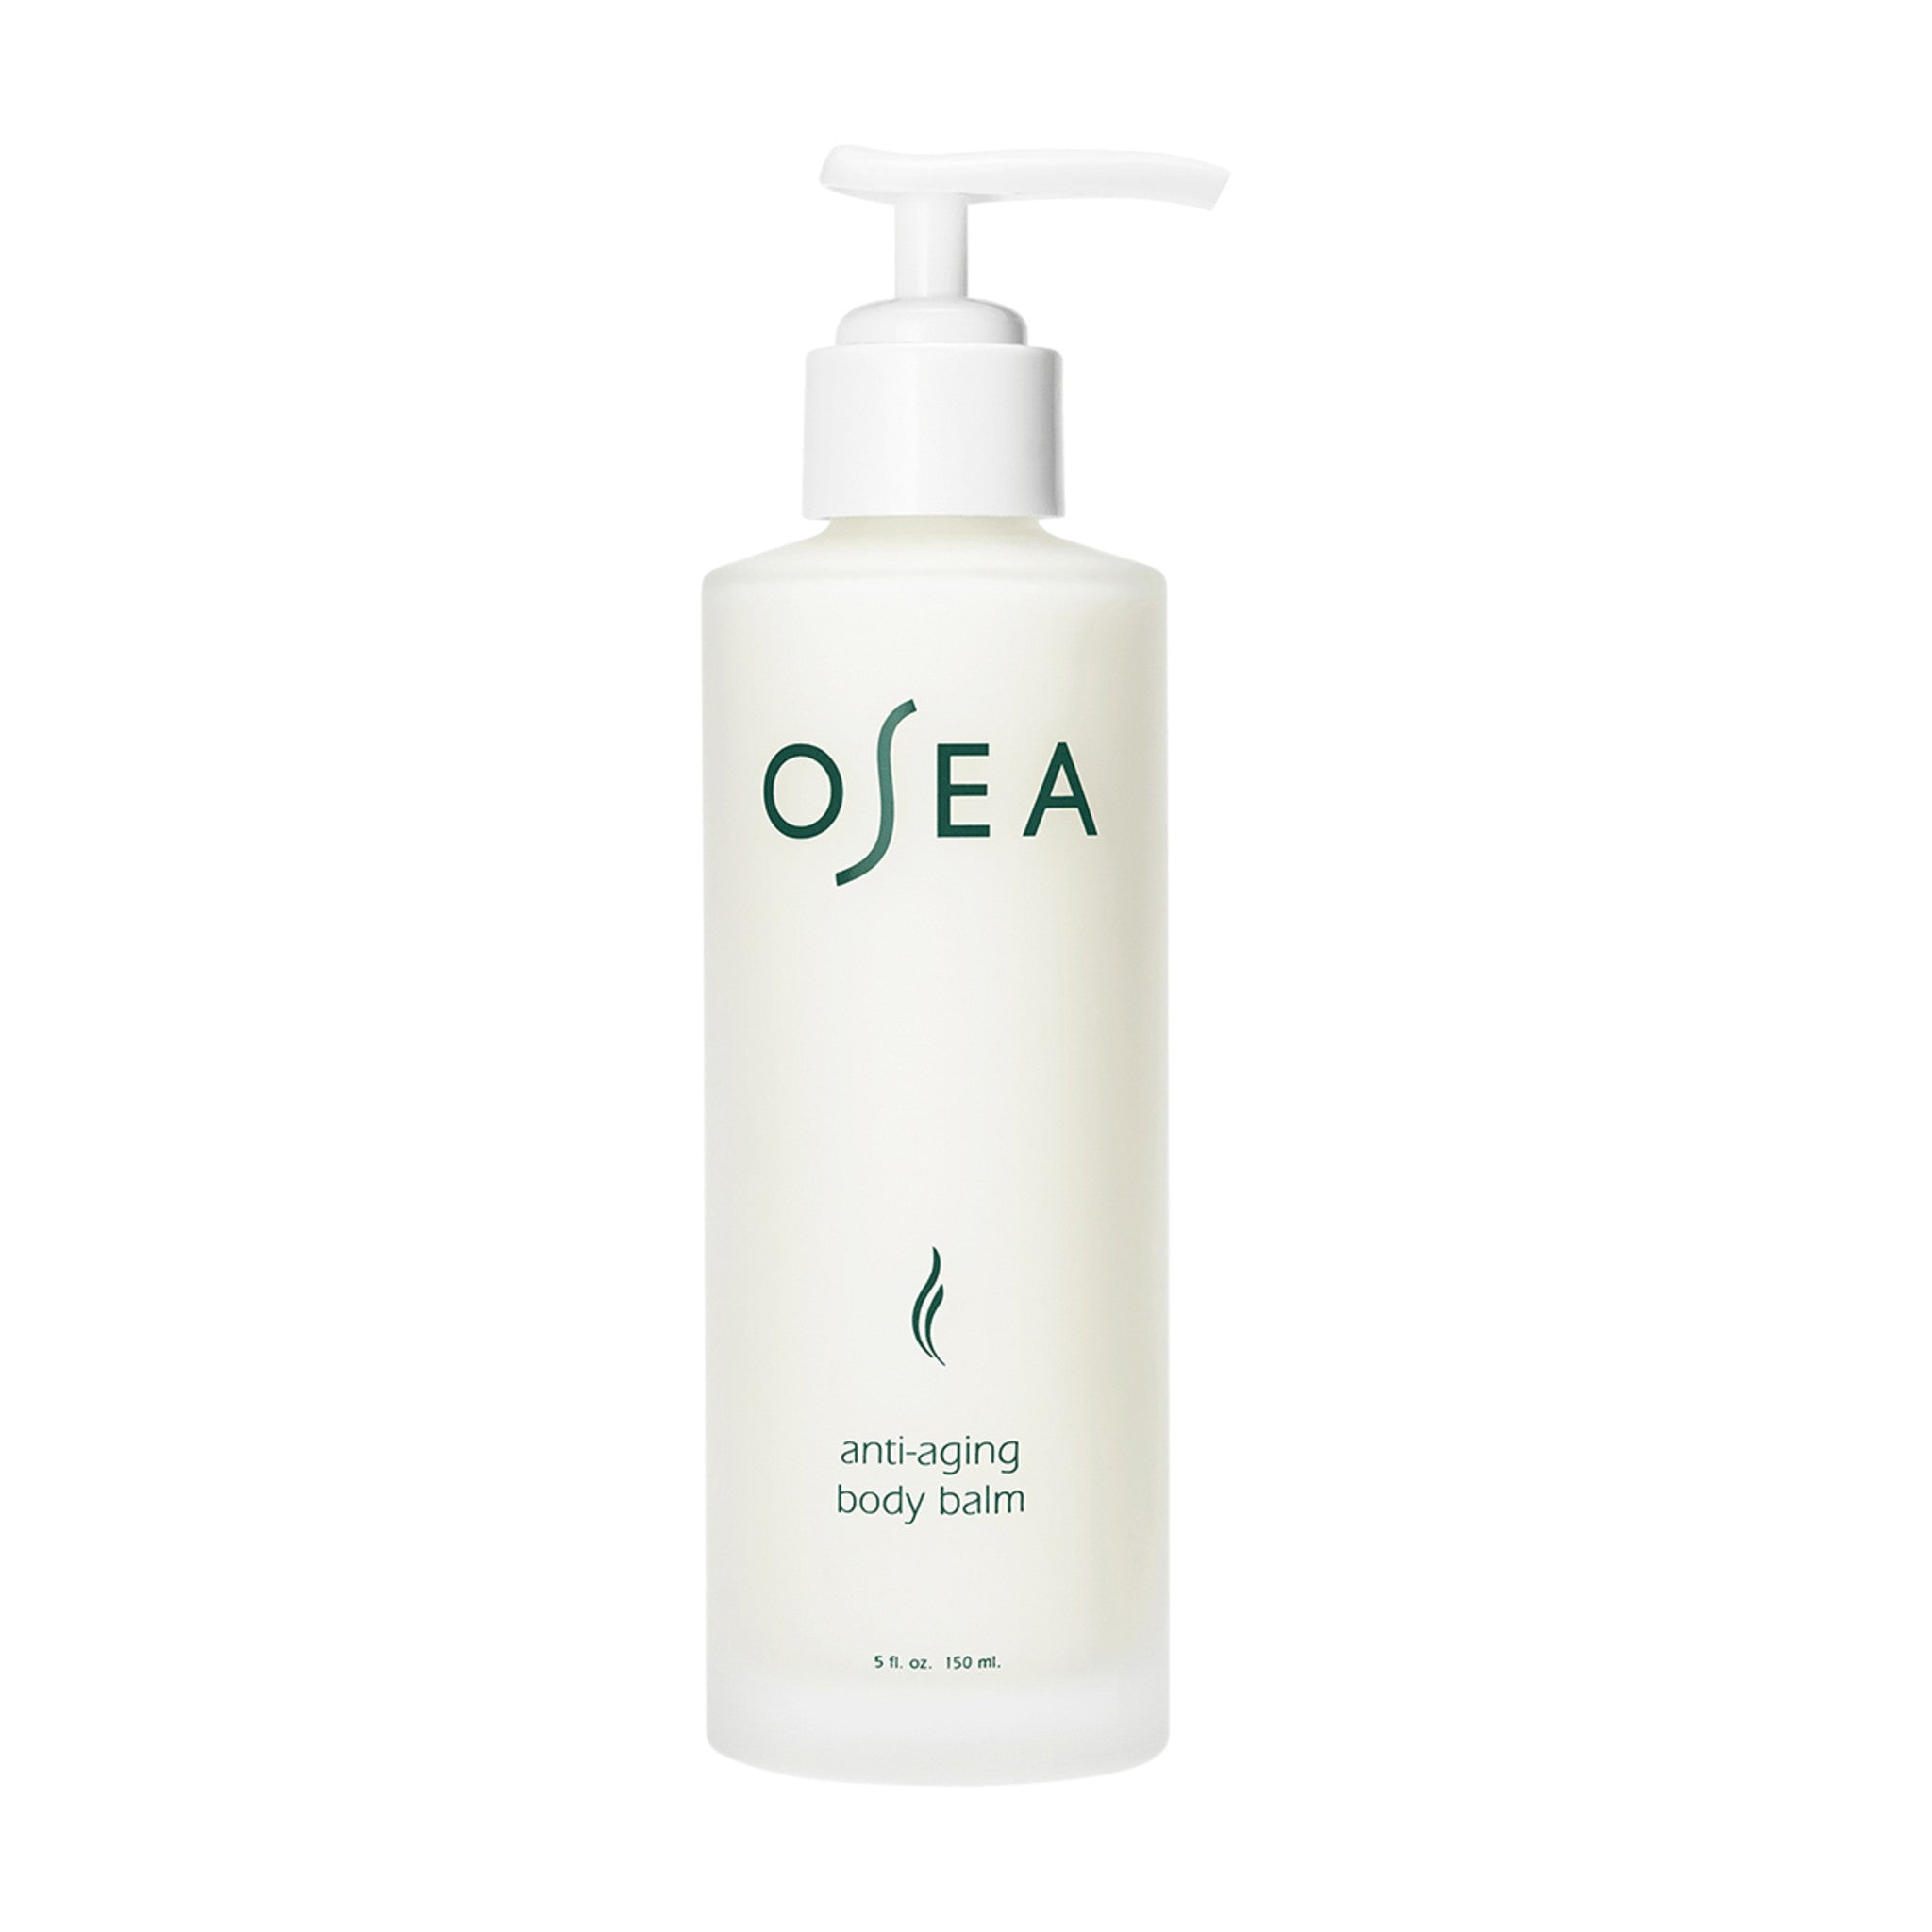 OSEA Anti-Aging Body Balm (Limited Edition) Size variant: 5 fl oz main image.